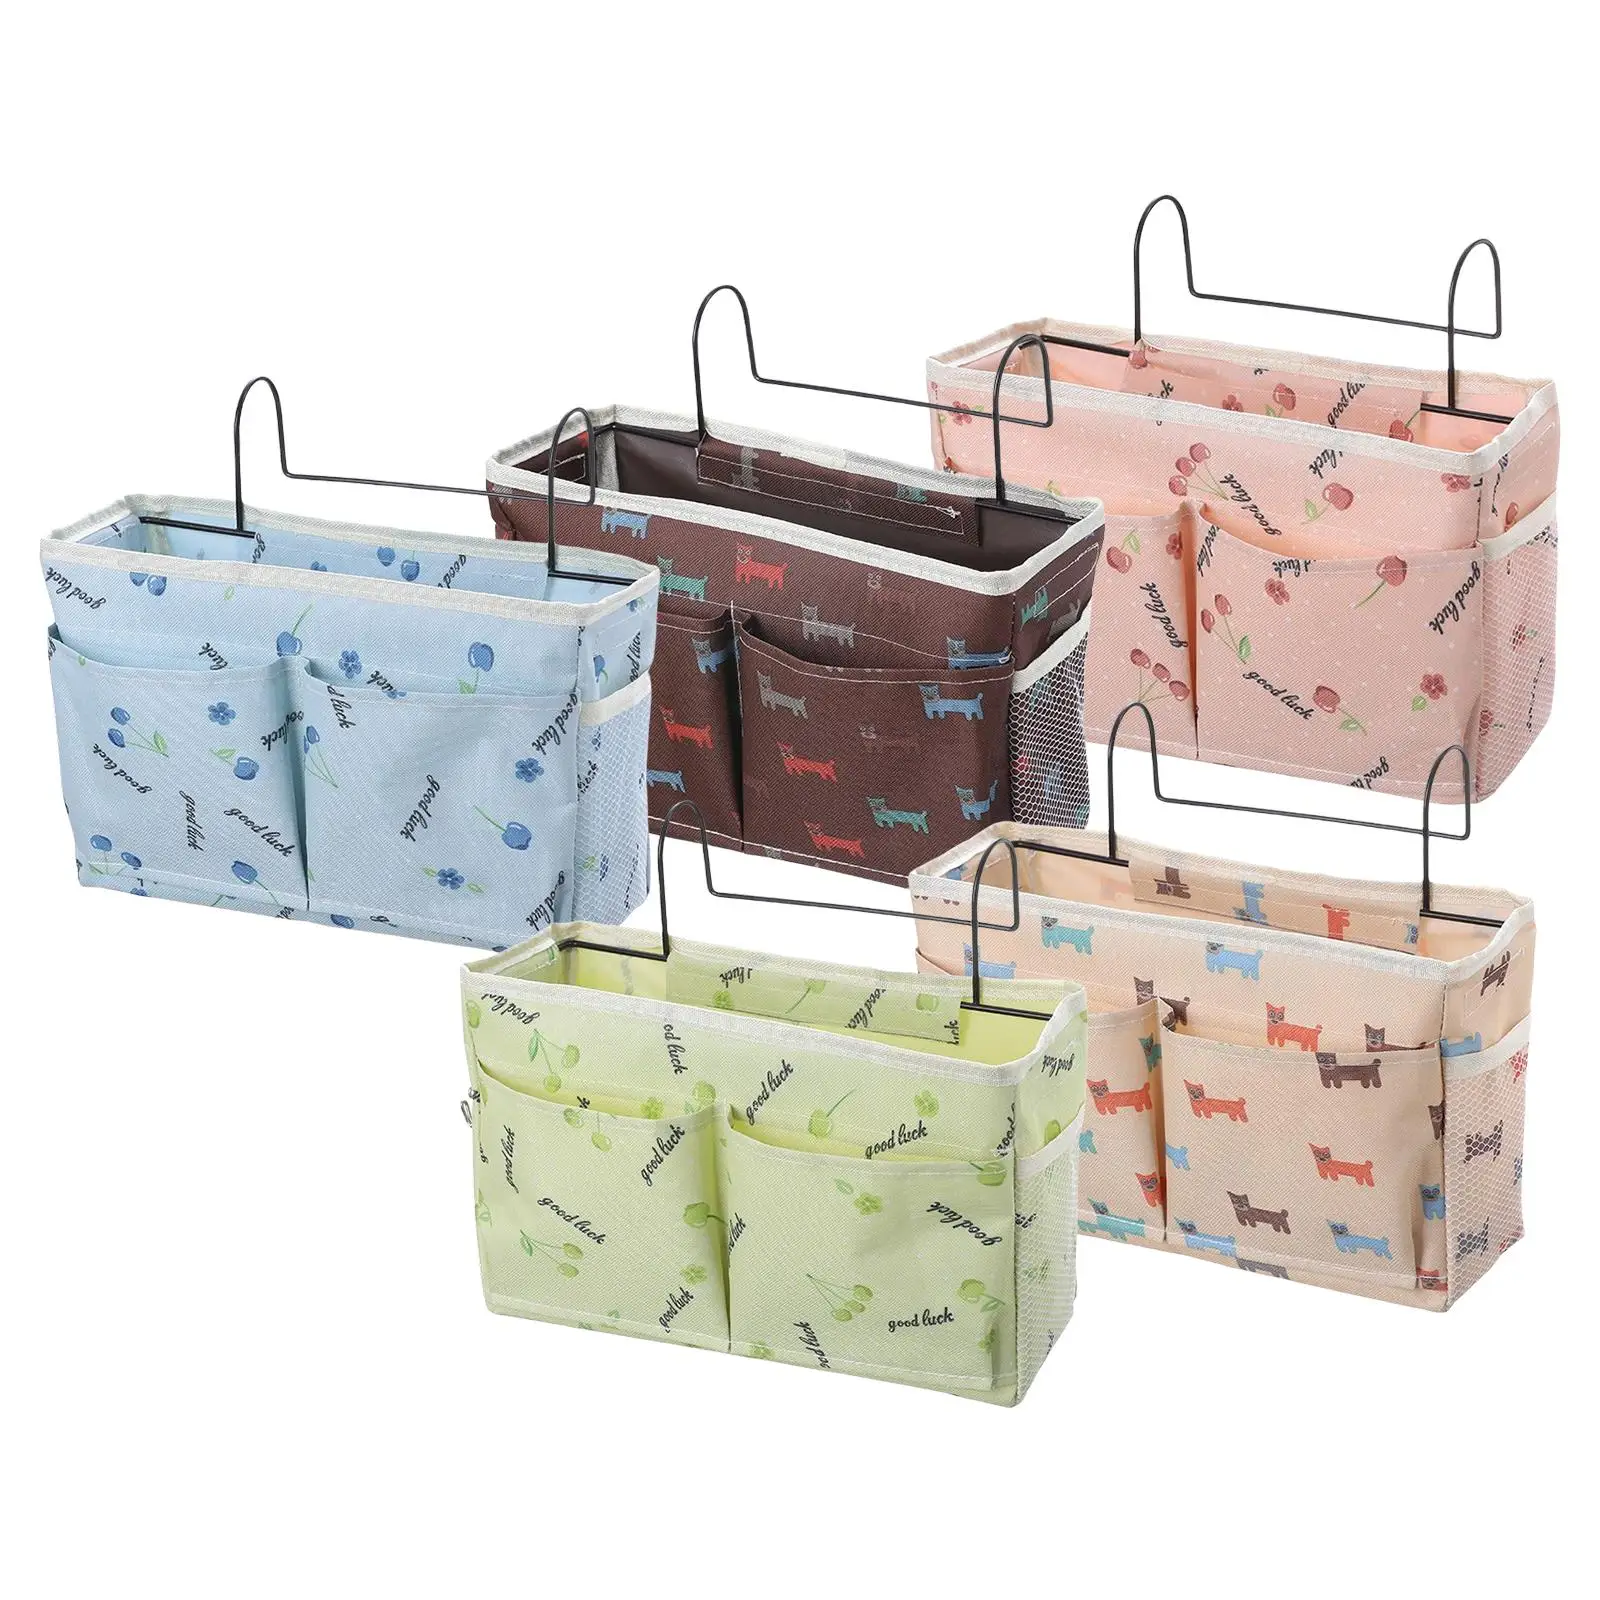 Bedroom Organizer Diaper Caddy Toy Holder Hanging Bedside Caddy for Mobile, Key Book